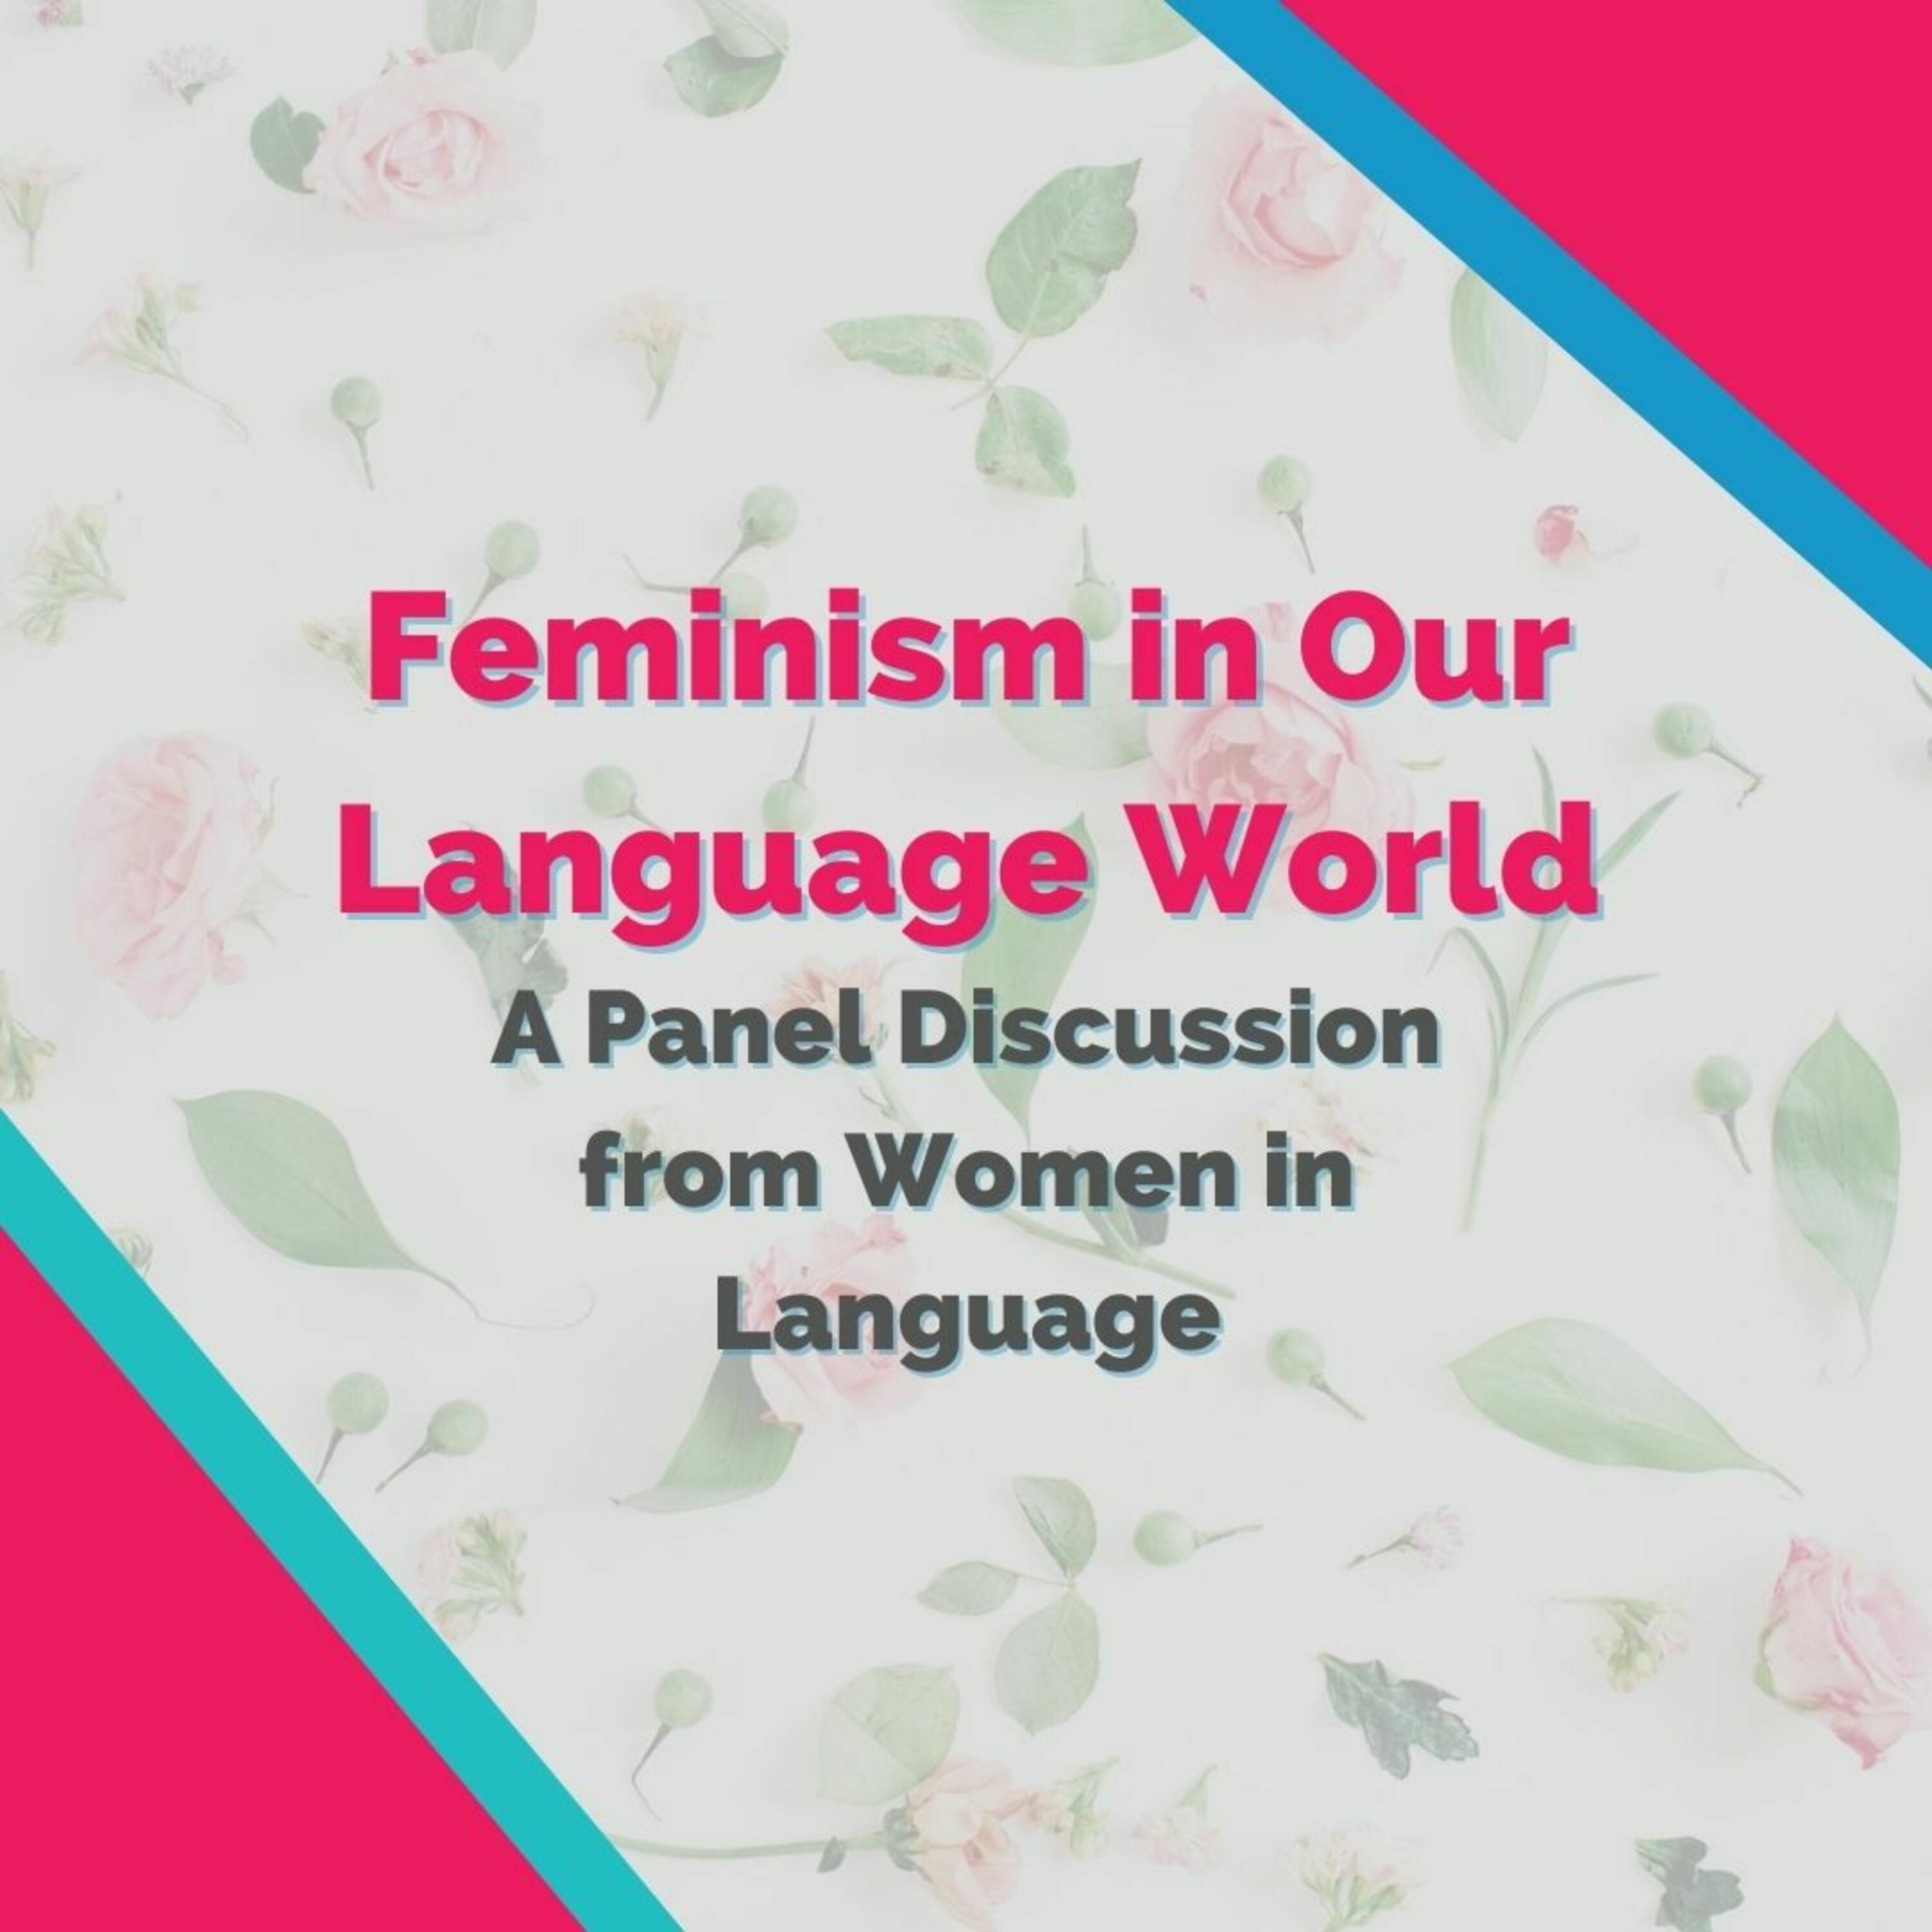 Feminism in Our Language World (Panel Discussion)